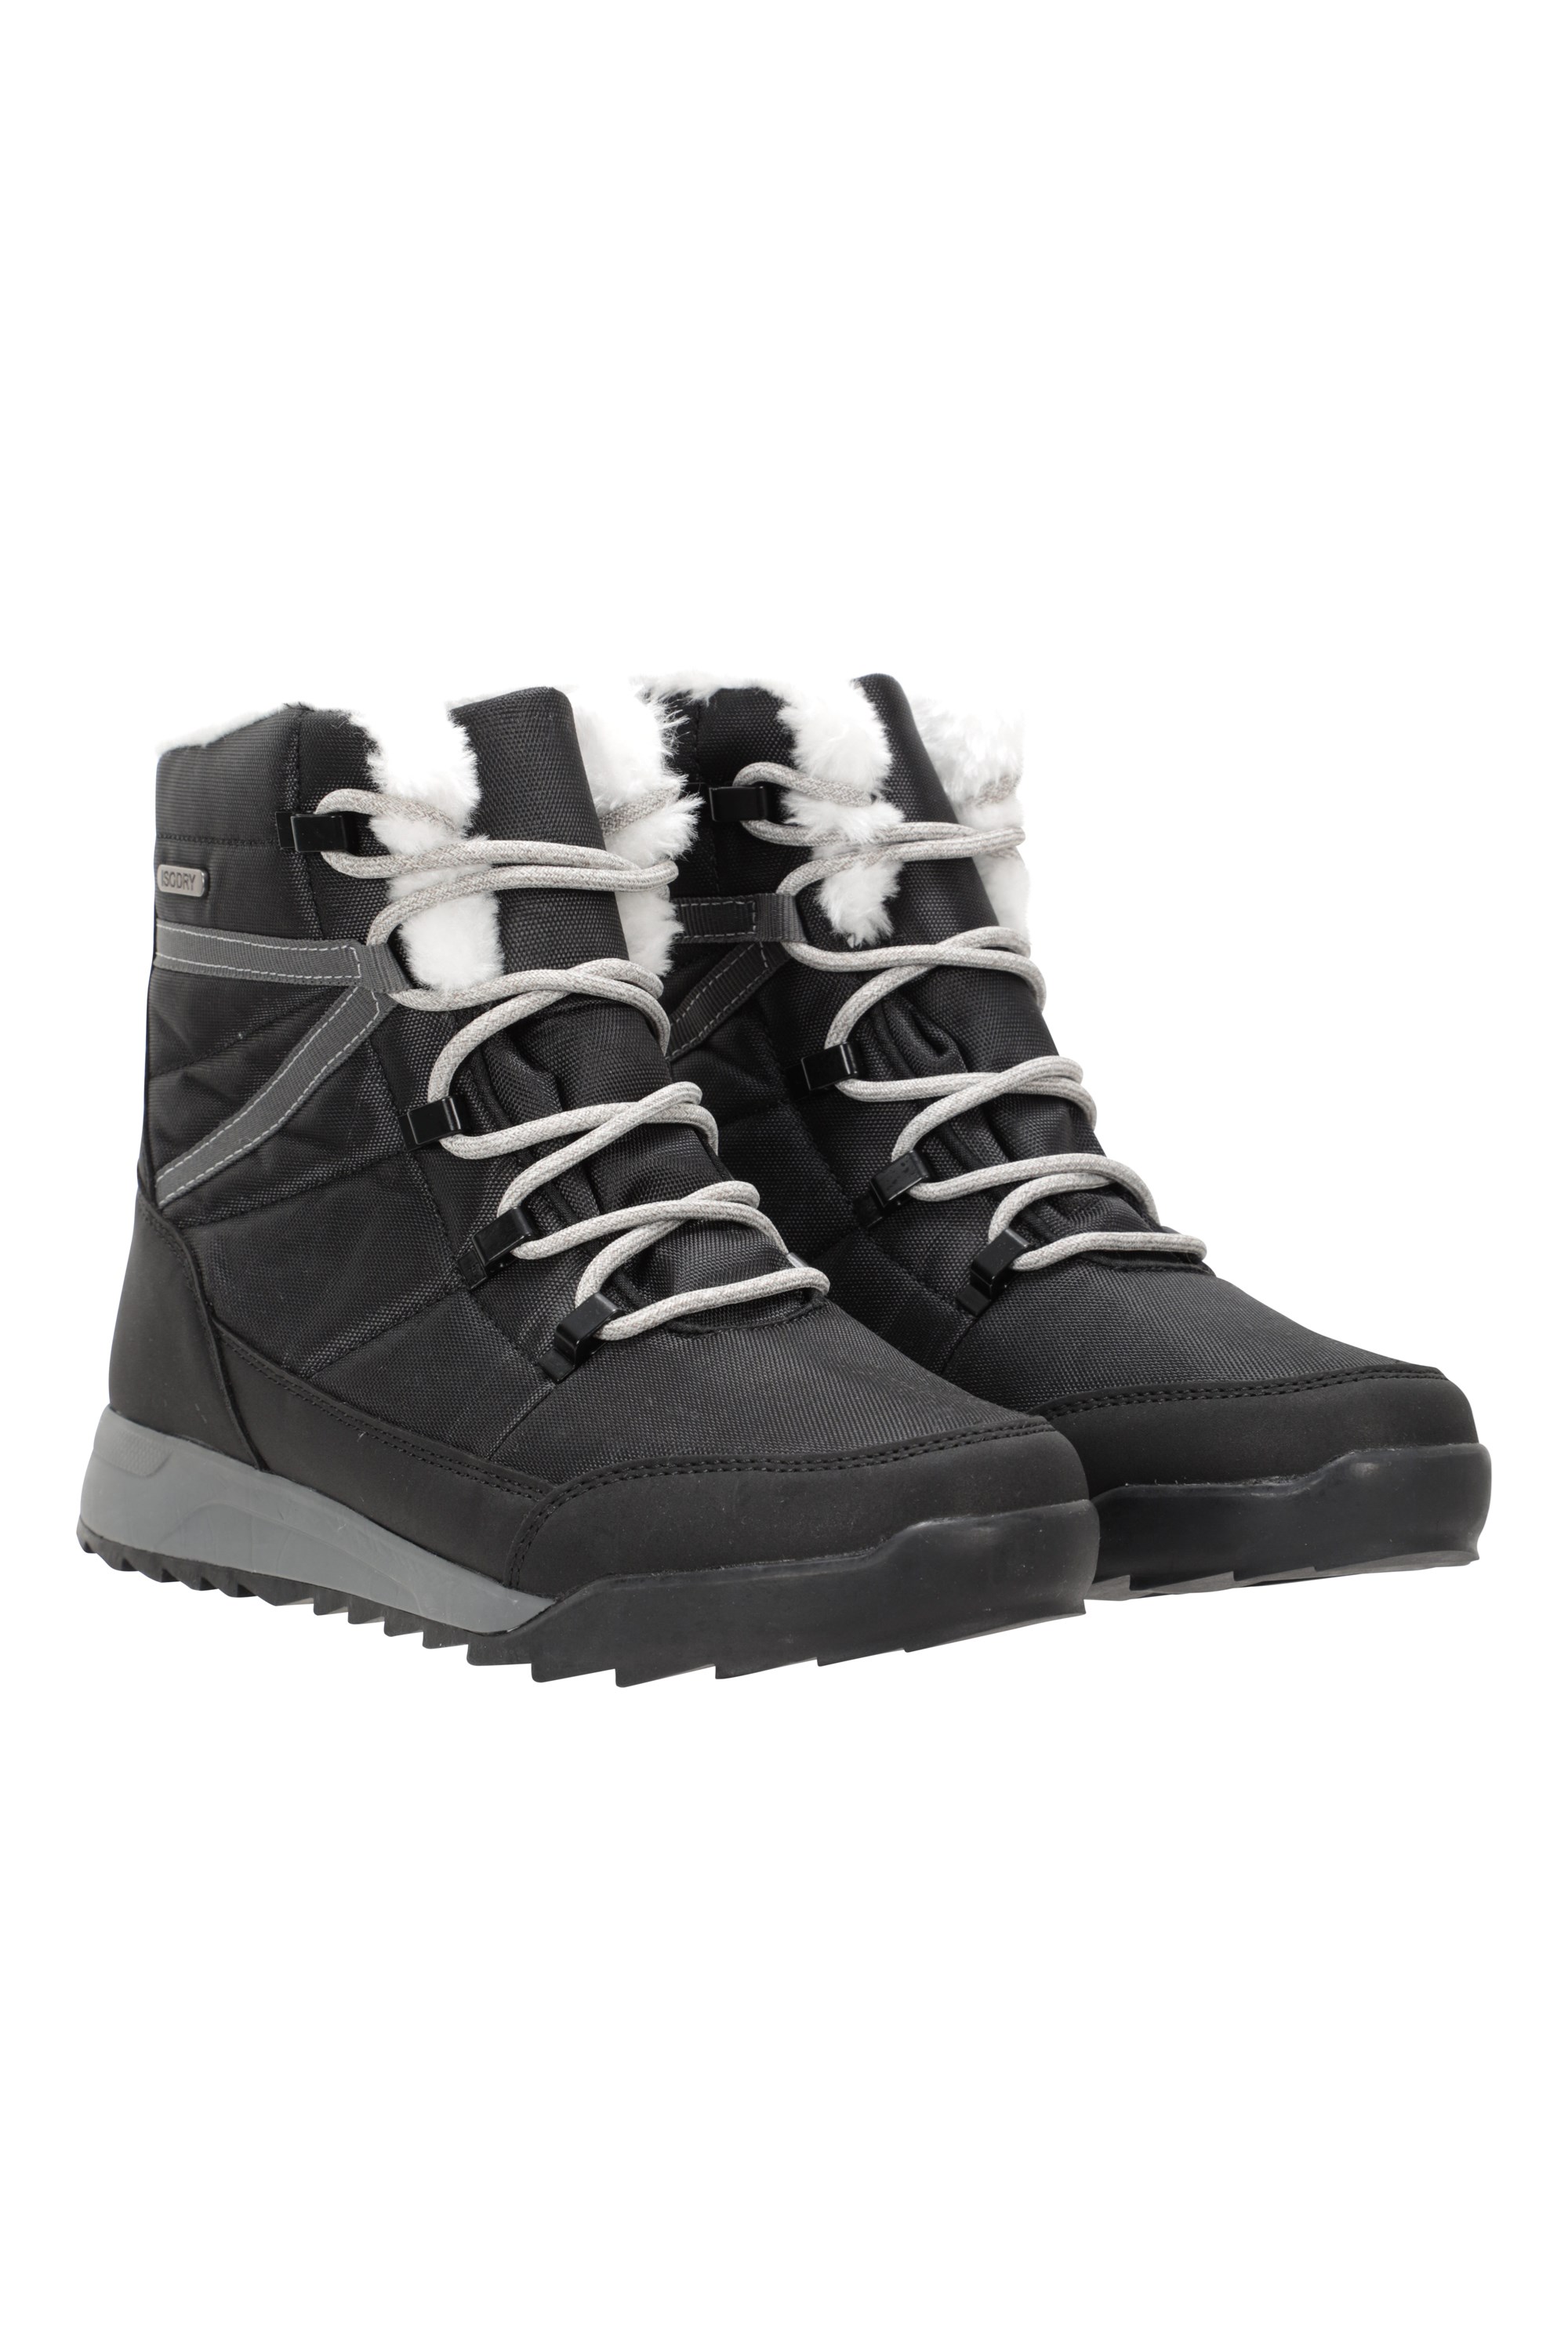 Leisure Womens Snow Boots - Charcoal